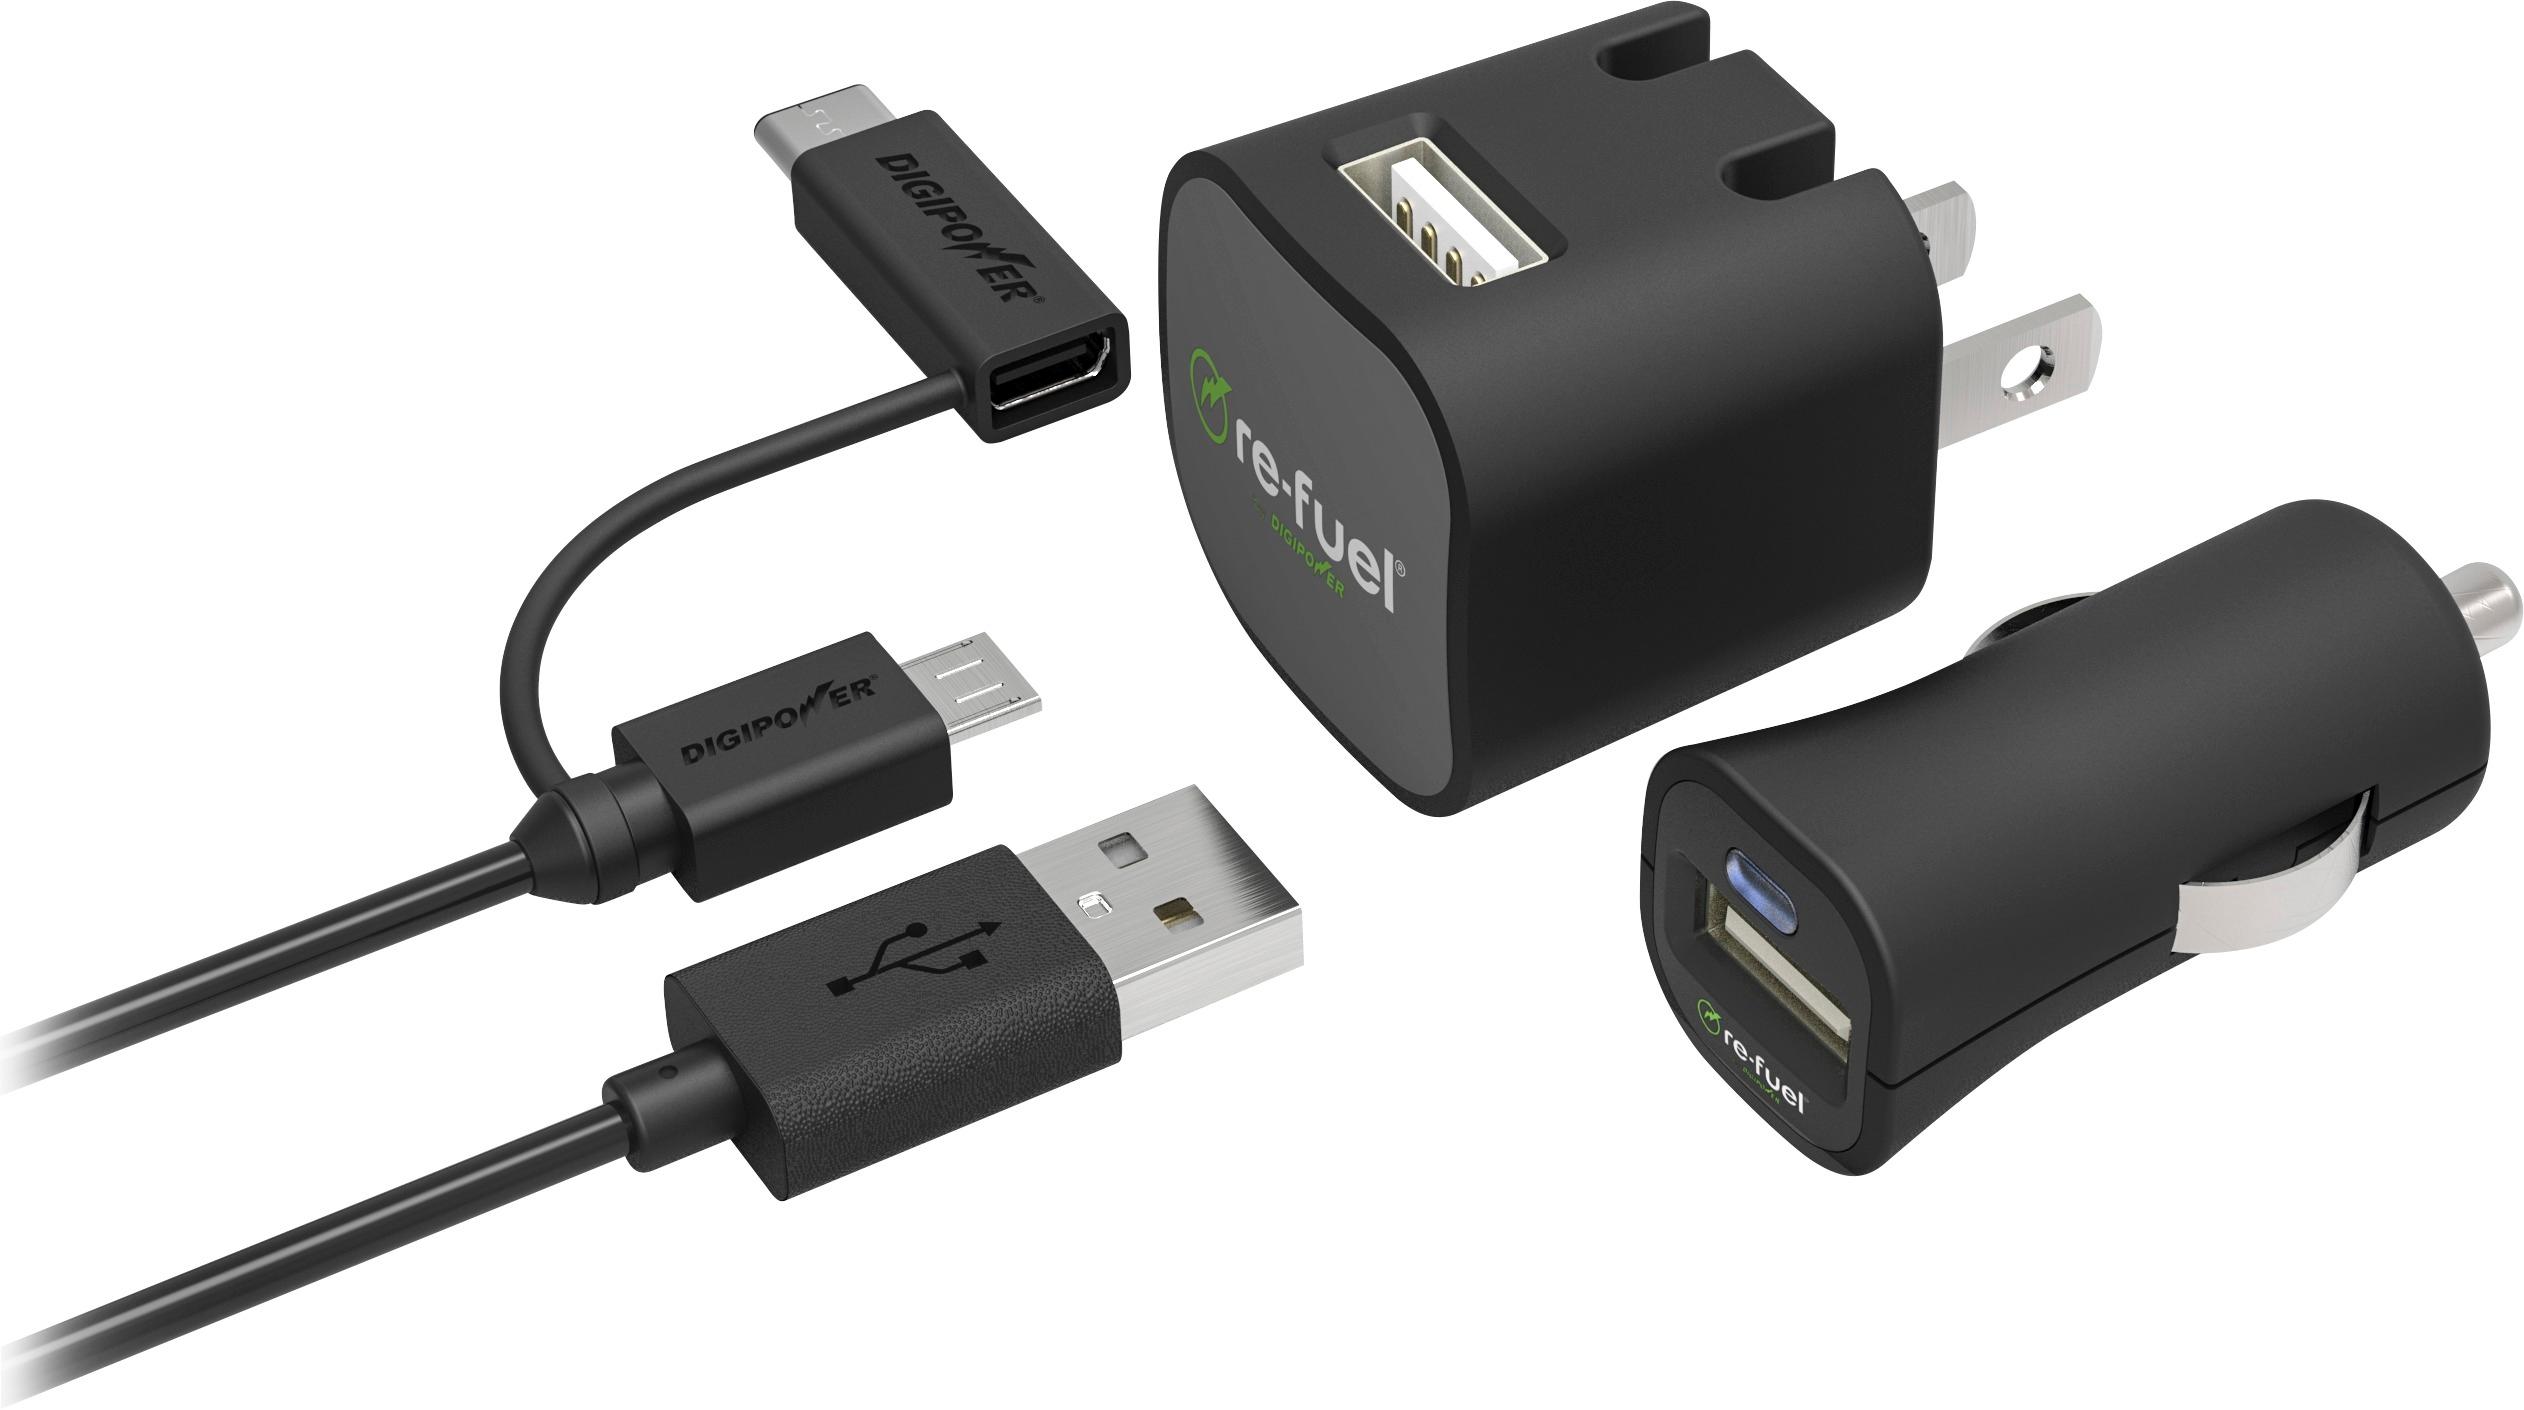 Digipower - Re-fuel Vehicle Charger - Black